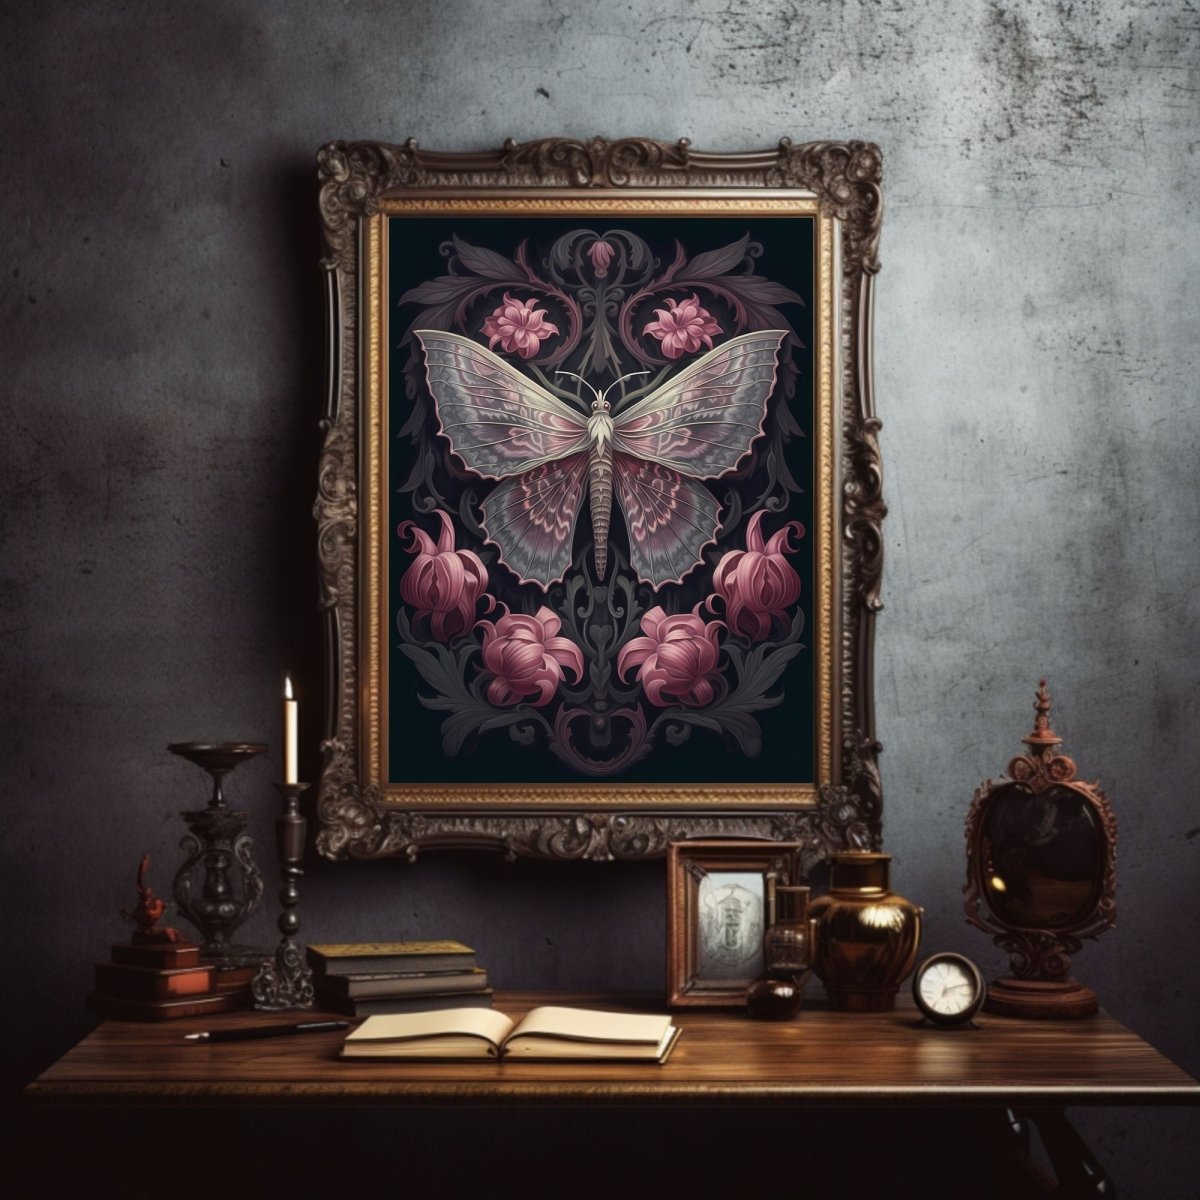 Dark Moth Paper Gothic Wall Art Poster Prints Witchy Gothic Botanical Decor Dark Academia Goblincore Goth Home Decor Moody Painting Library Decor Antique - Everything Pixel